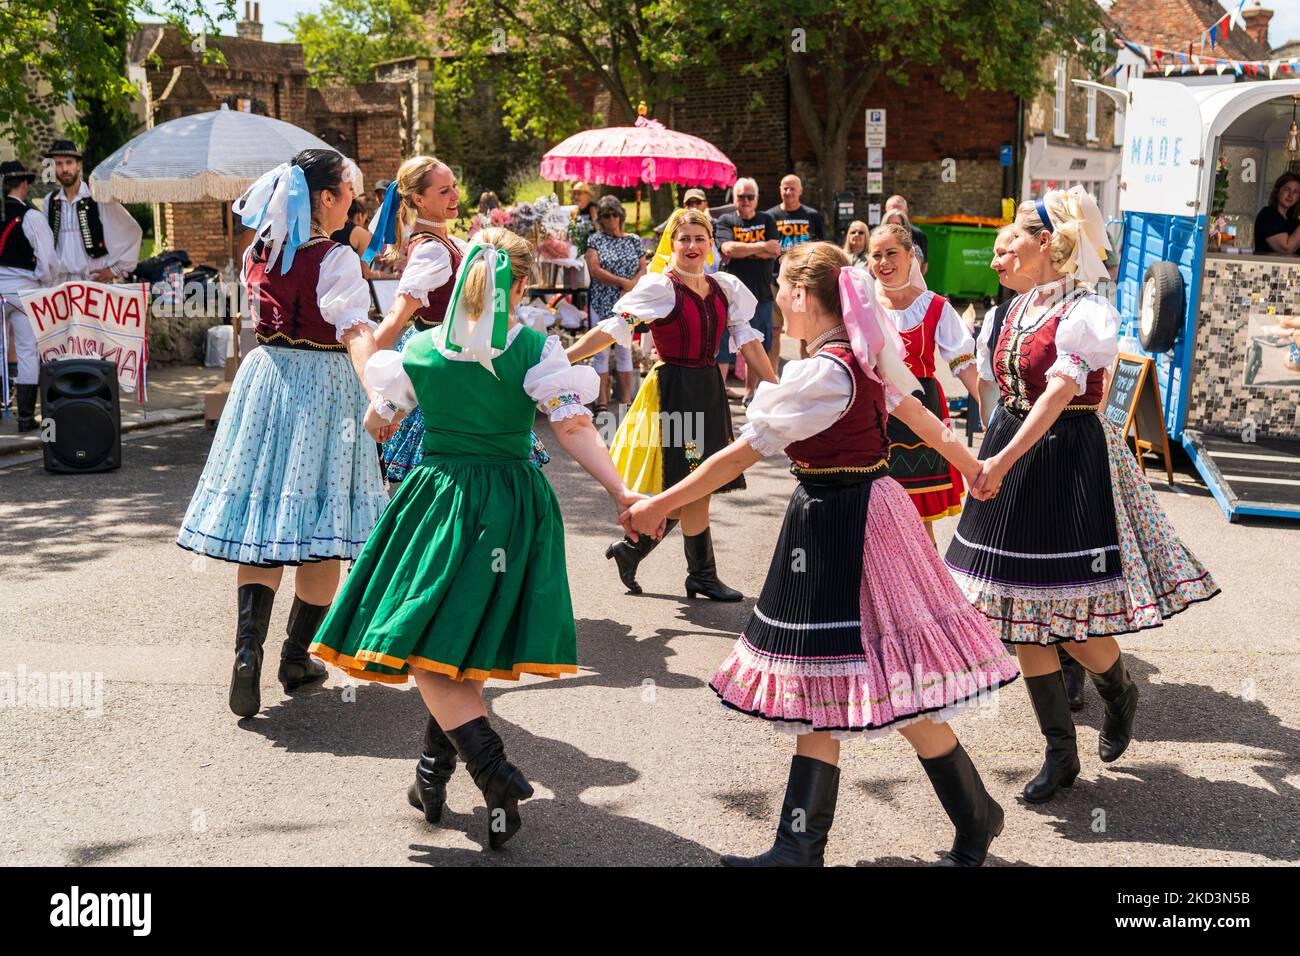 Bulgarian folk dancers in traditional costume dancing on the street at an event in the English medieval town of Sandwich in the summer. Stock Photo